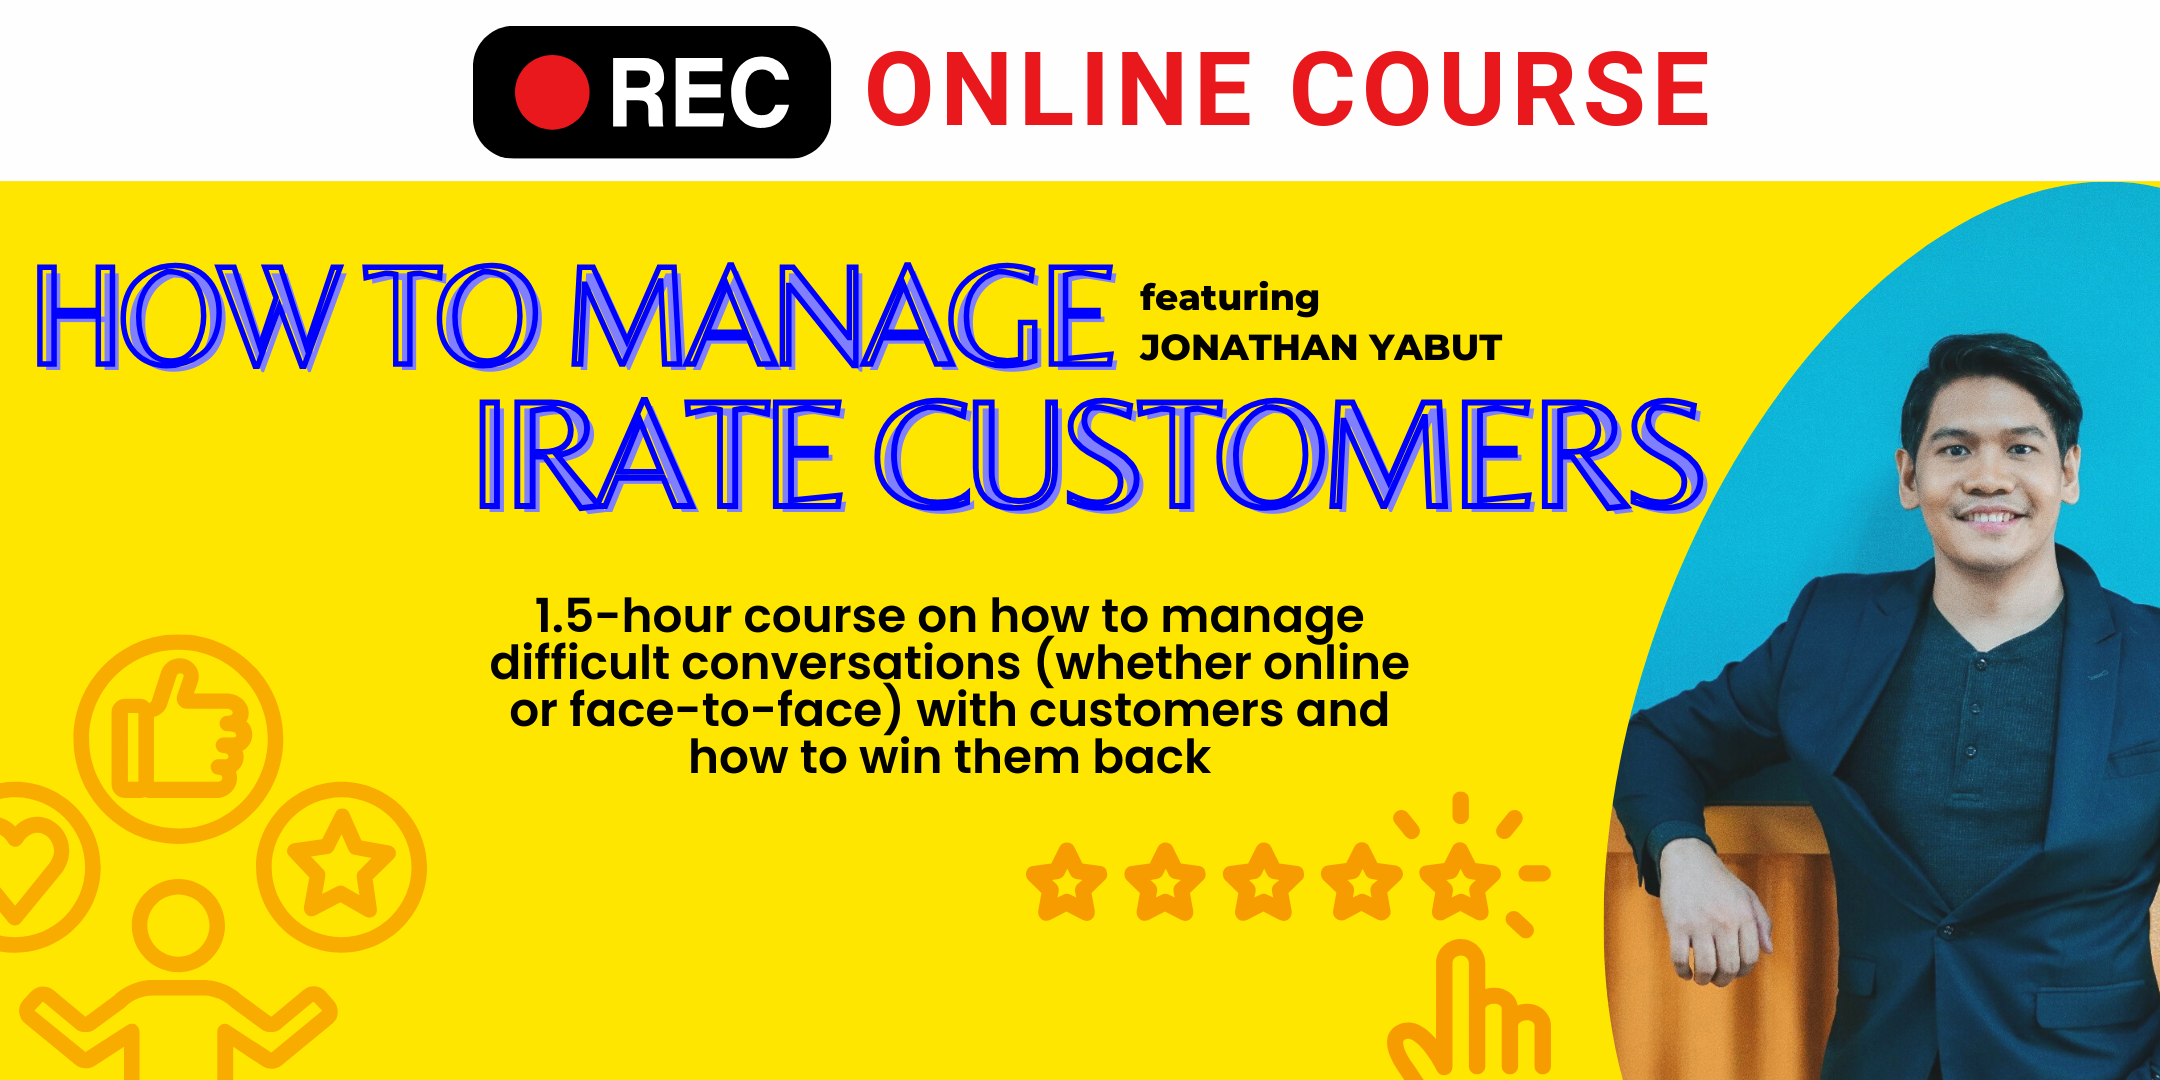 Level-Up-Your-Customer-Service-How-to-Manage-Irate-Customers